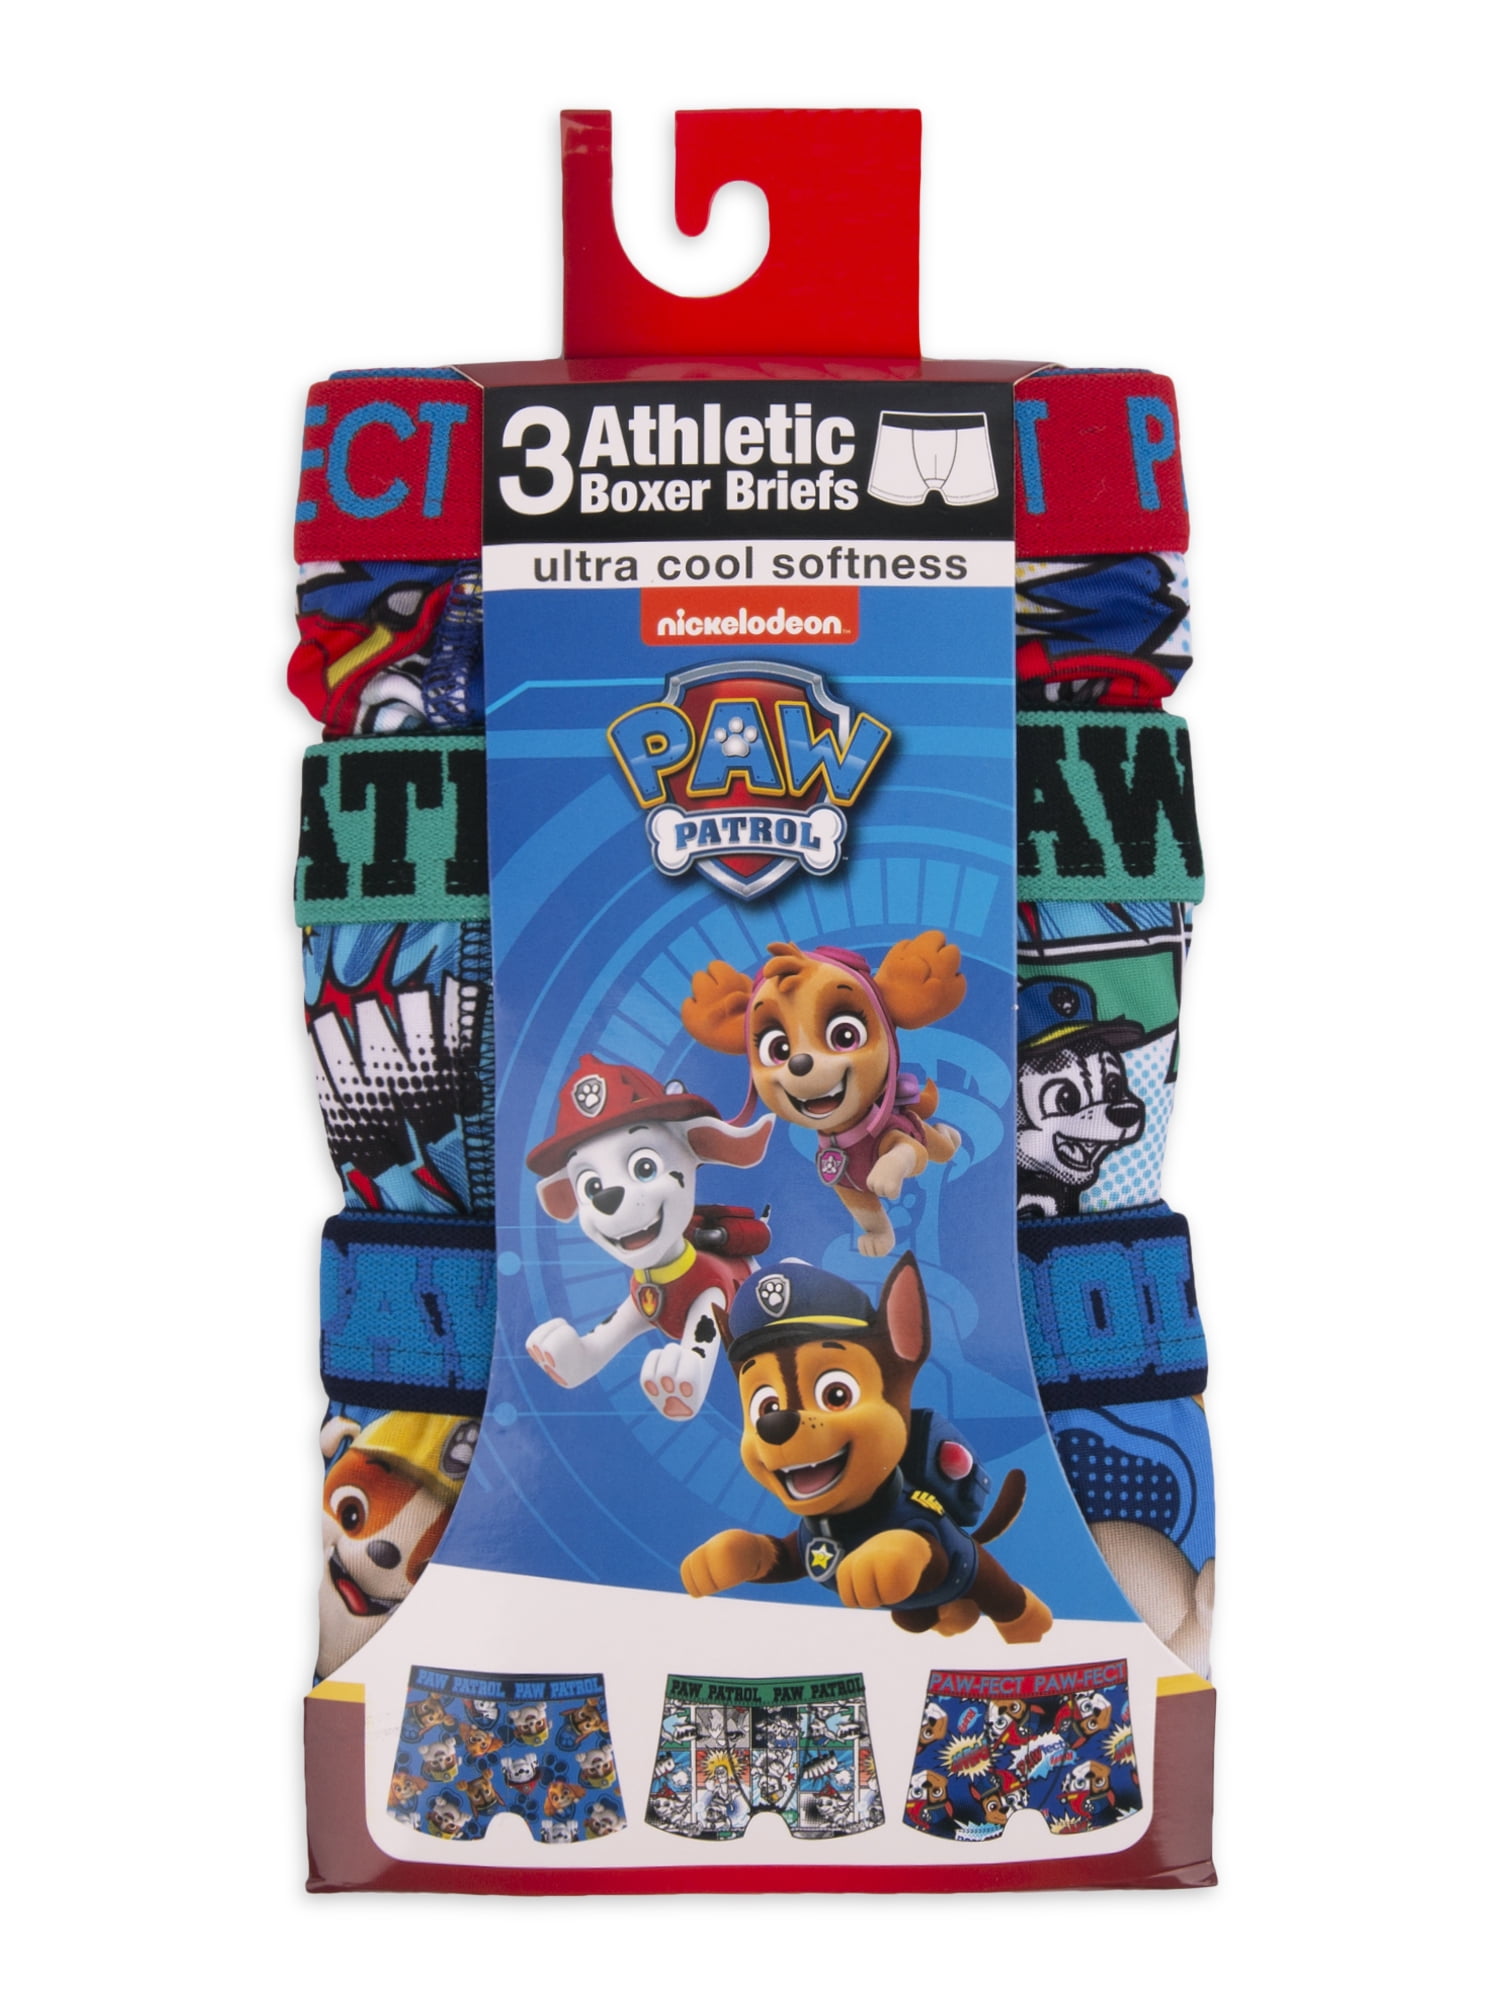  Paw Patrol boys Underwear Multipacks Boxer Briefs, Paw 5pk Bxr  Br Multicolored, 2-3T US: Clothing, Shoes & Jewelry